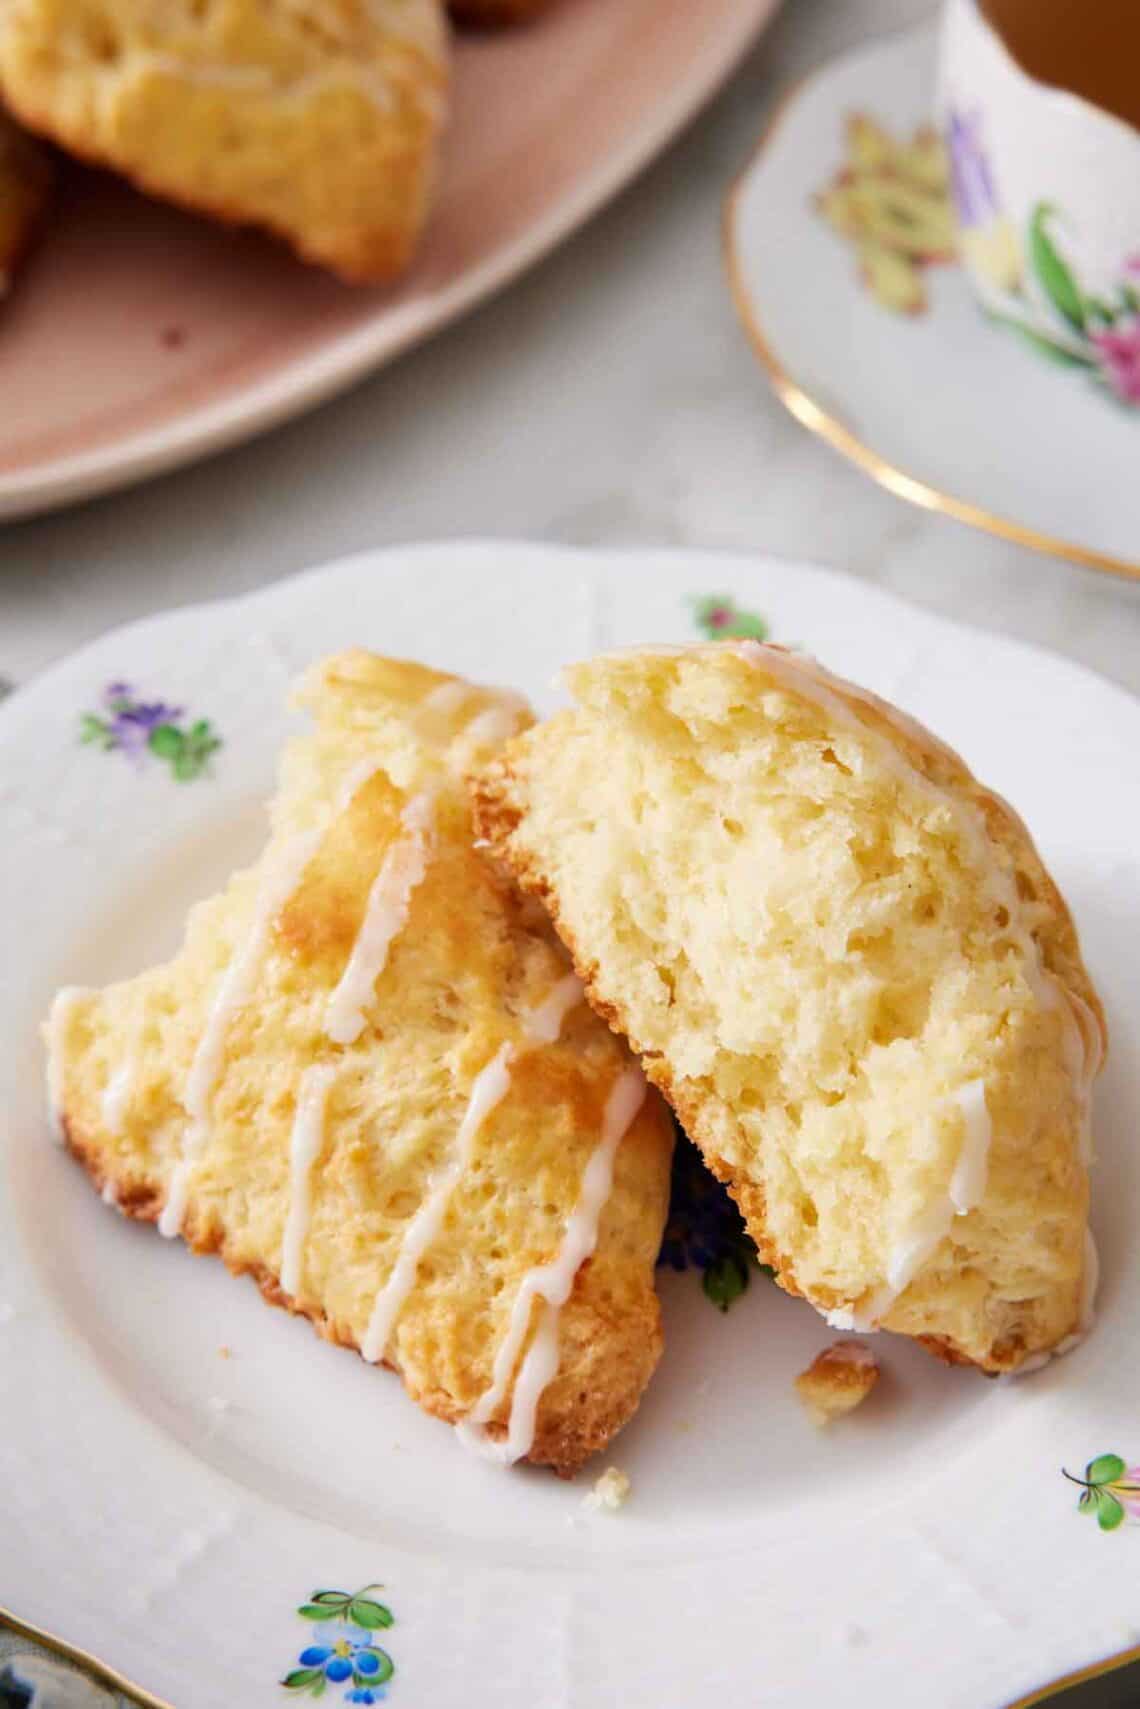 A plate with a lemon scone torn in half. A drizzle of icing over the torn scone.